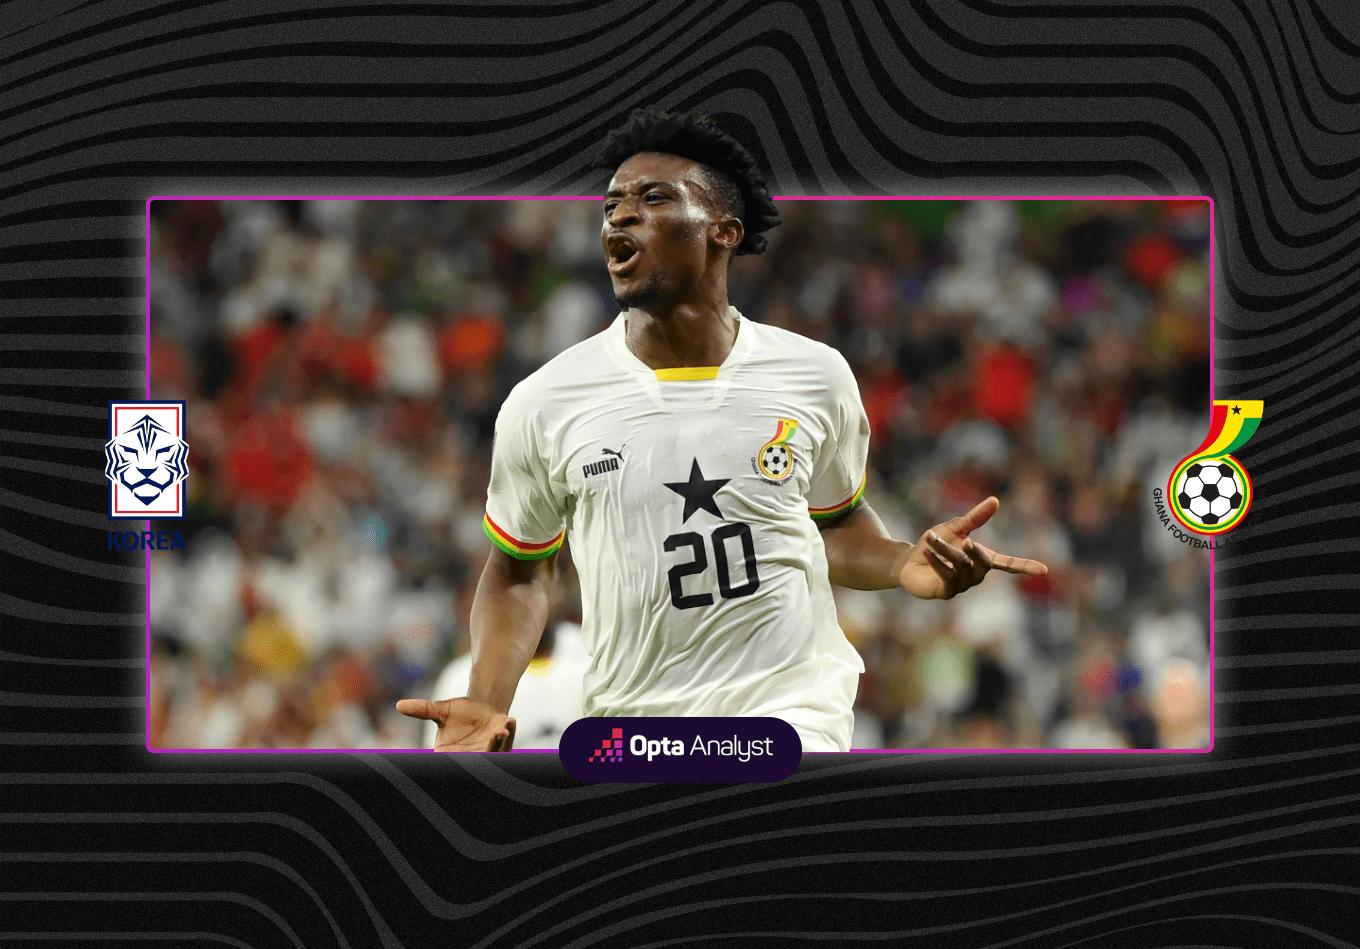 South Korea 2-3 Ghana: Kudus Shines in Yet Another Thriller